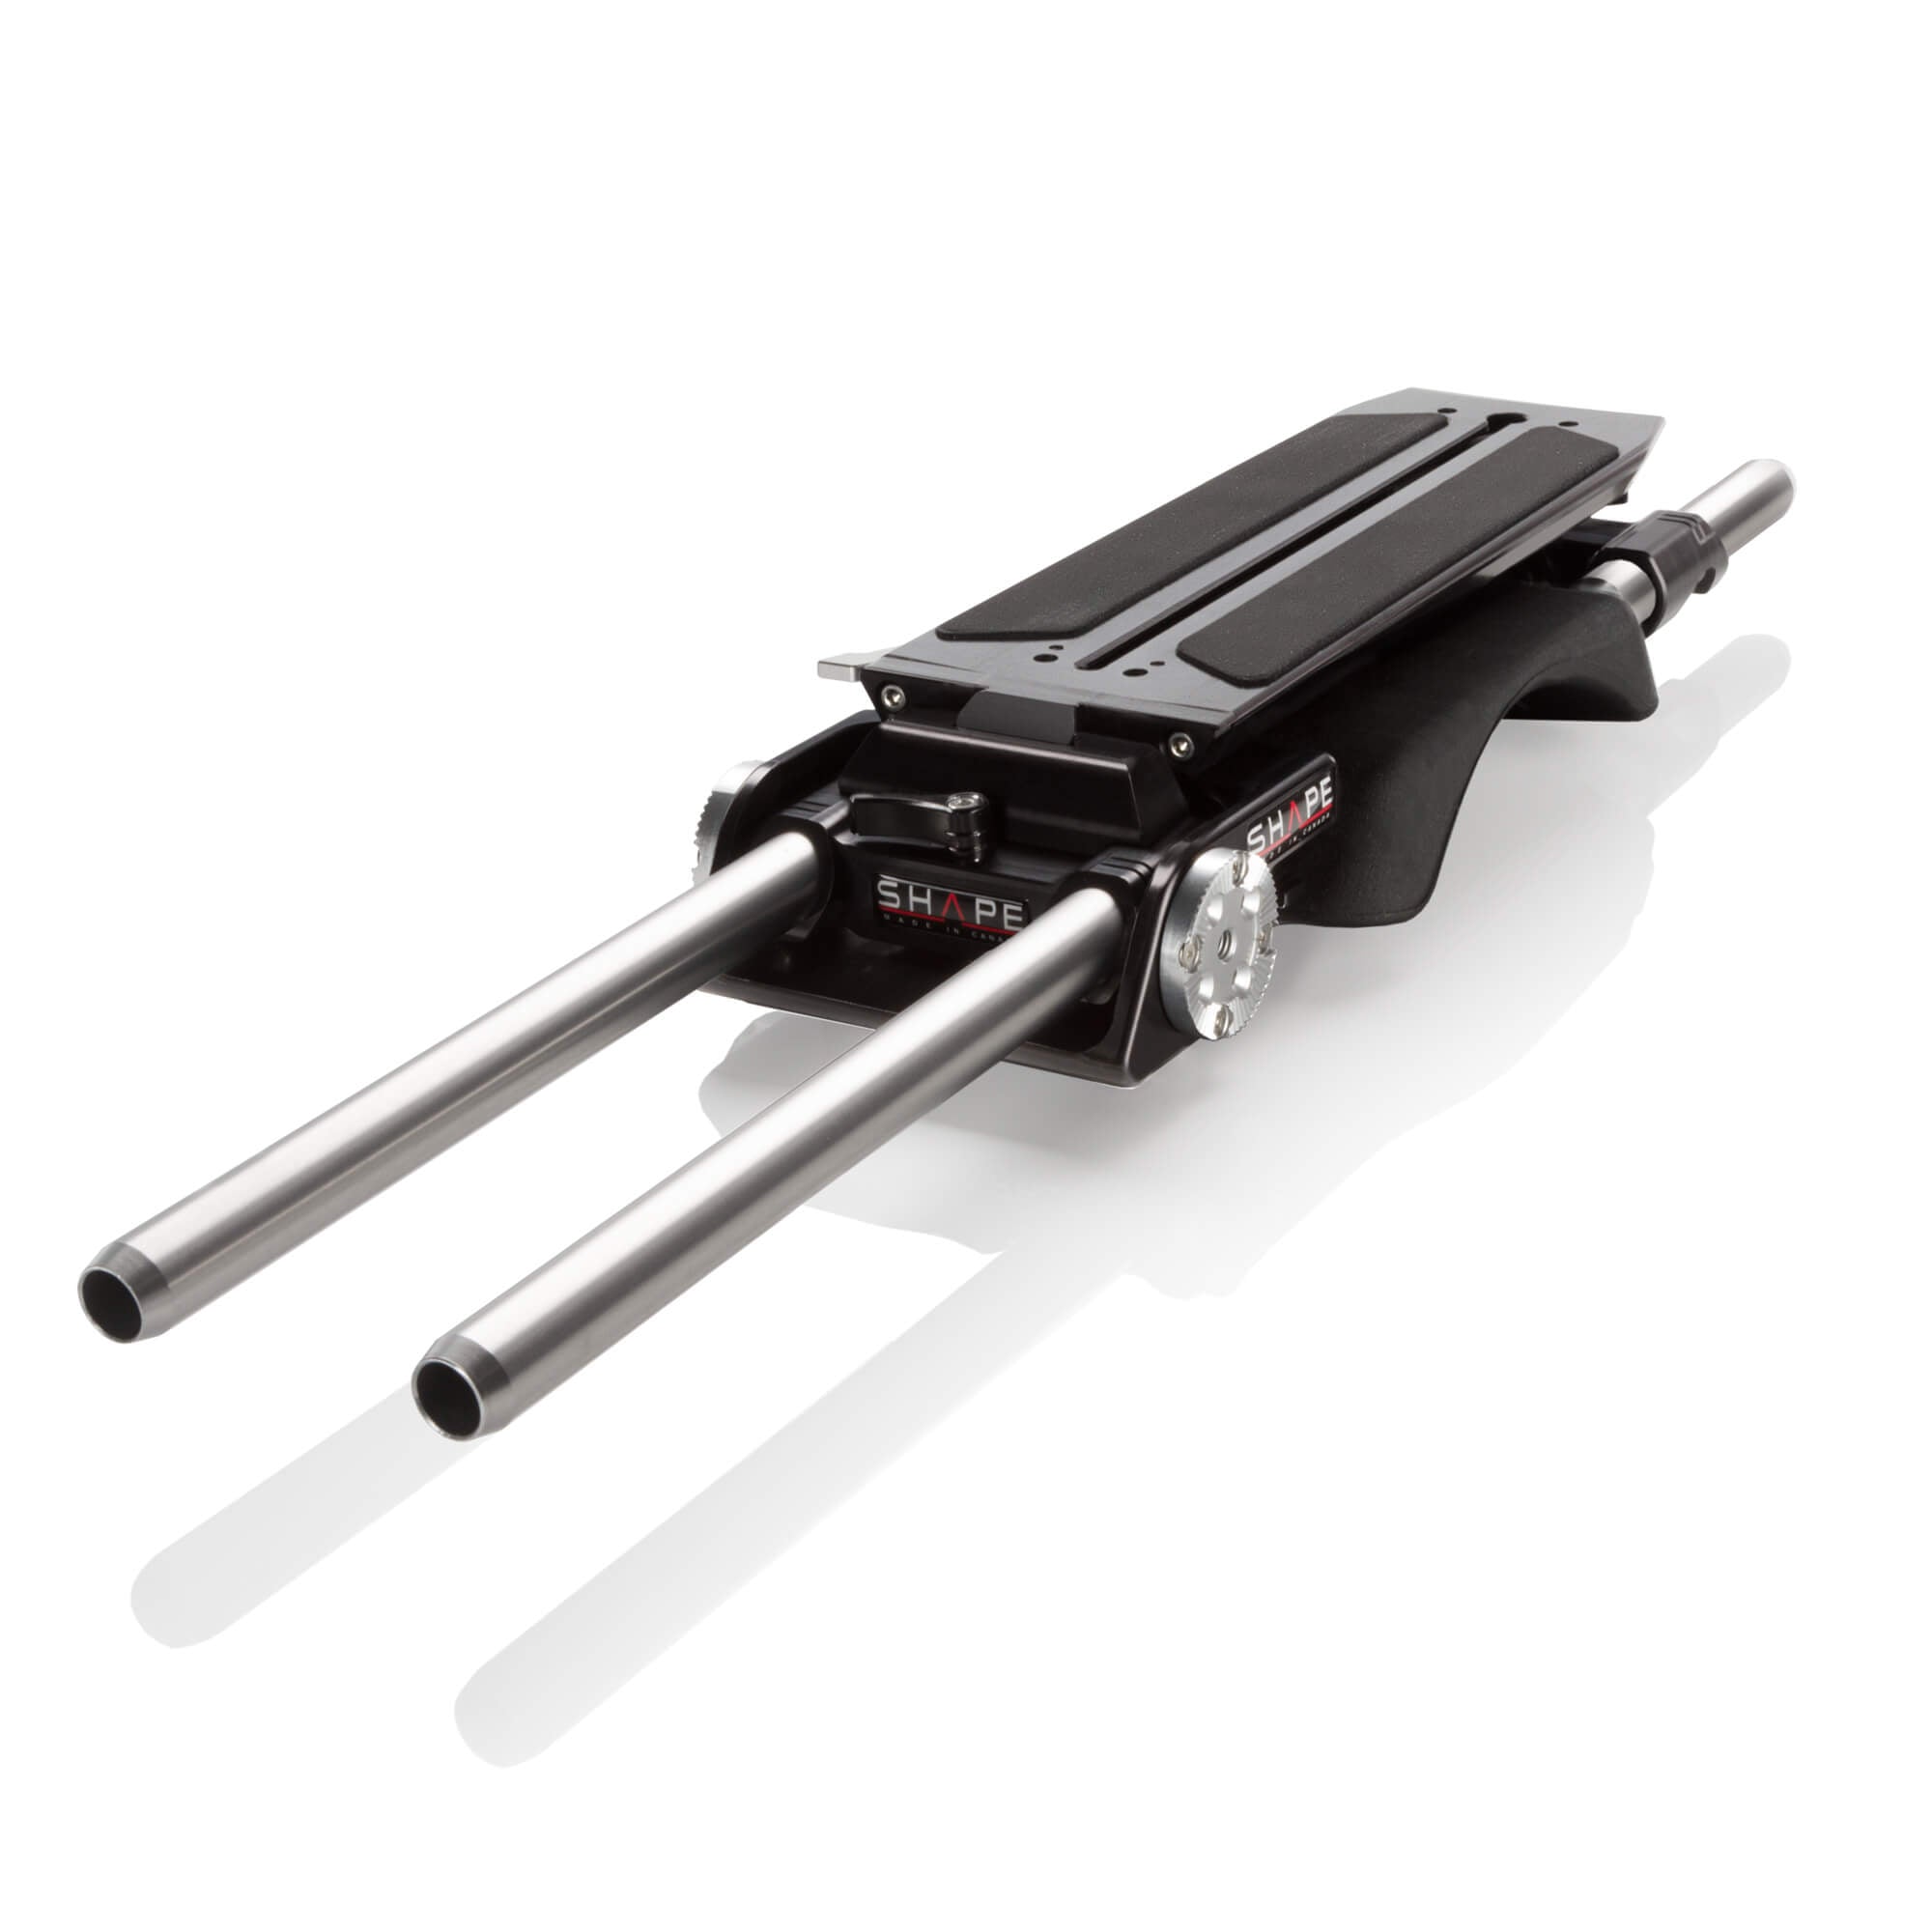 SHAPE VCT Universal Baseplate with Handles - SHAPE wlb